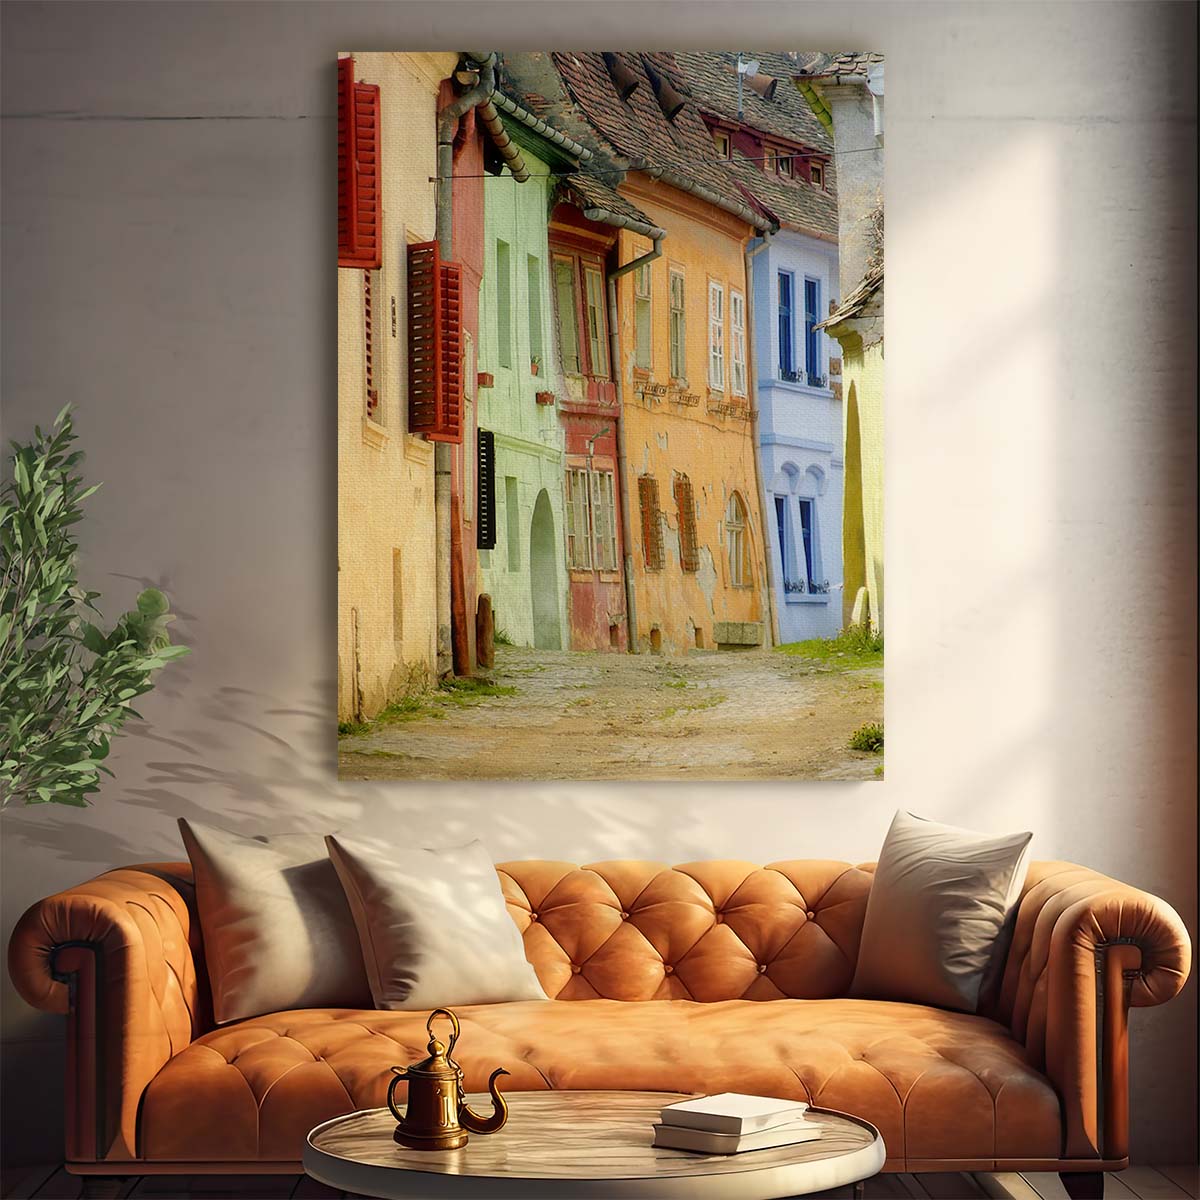 Colorful Sighisoara Old Town Architecture Photography Wall Art by Luxuriance Designs, made in USA